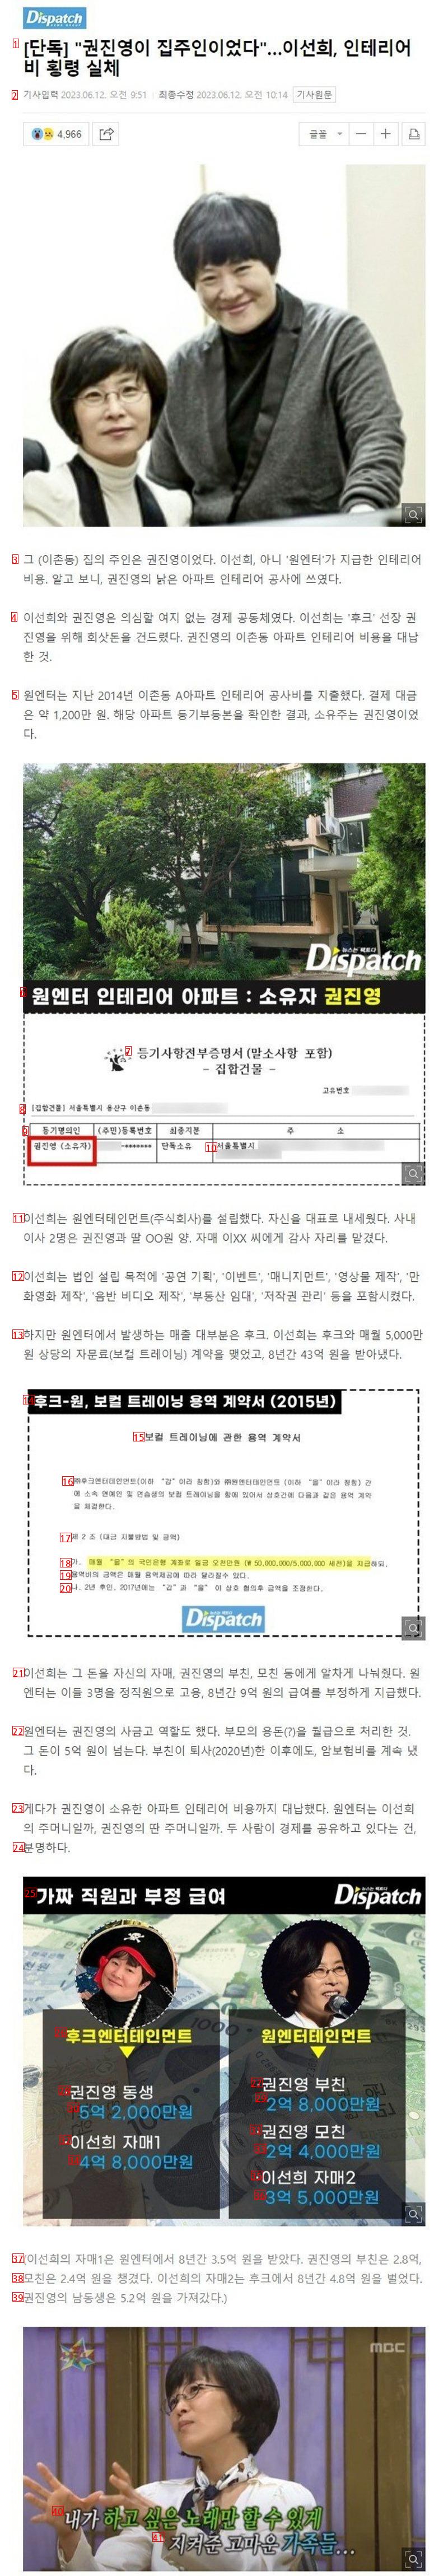 Disclosure of Lee Sunhee from Dispatch